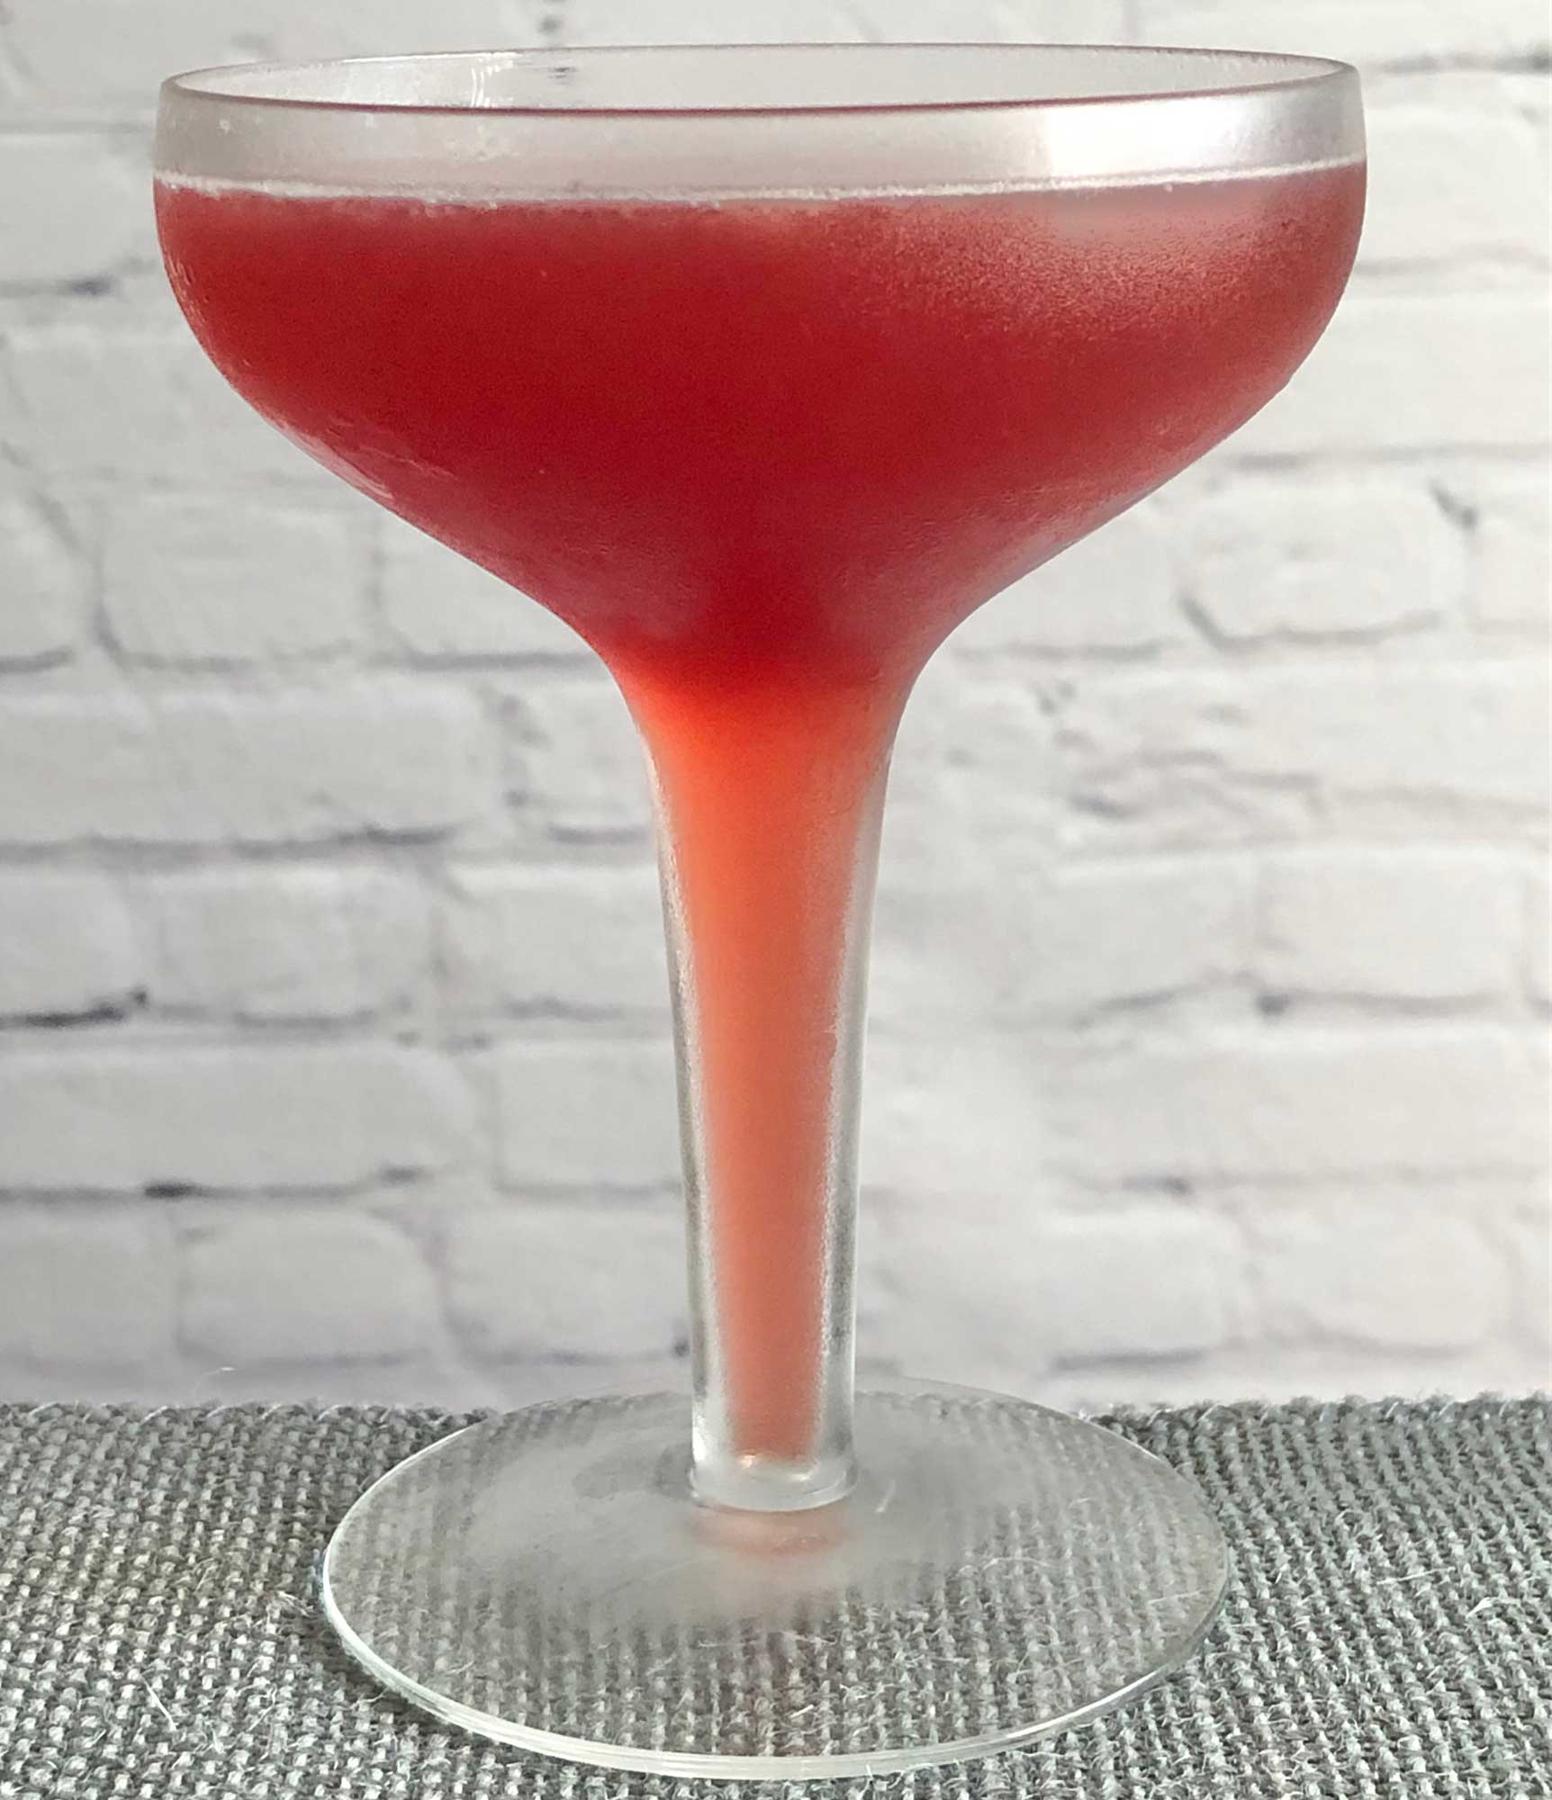 An example of the Robson Cocktail, the mixed drink (drink), by Savoy Cocktail Book, featuring Smith & Cross Traditional Jamaica Rum, grenadine, orange juice, lemon juice, and Angostura bitters; photo by Lee Edwards